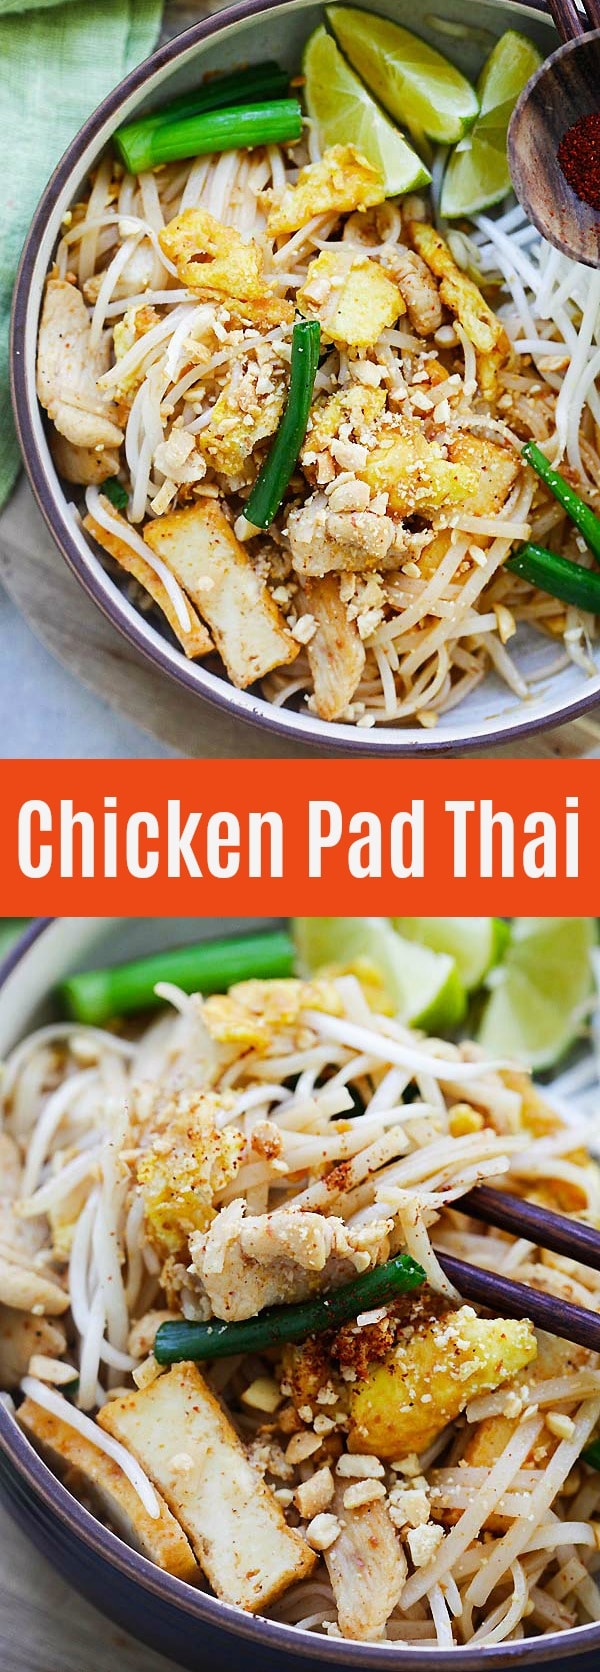 Chicken Pad Thai - quick and easy Pad Thai with chicken. Learn how to make this amazing Thai stir-fried noodles with a sweet and savory homemade Pad Thai sauce. It's so good you don't need another takeout again | rasamalaysia.com